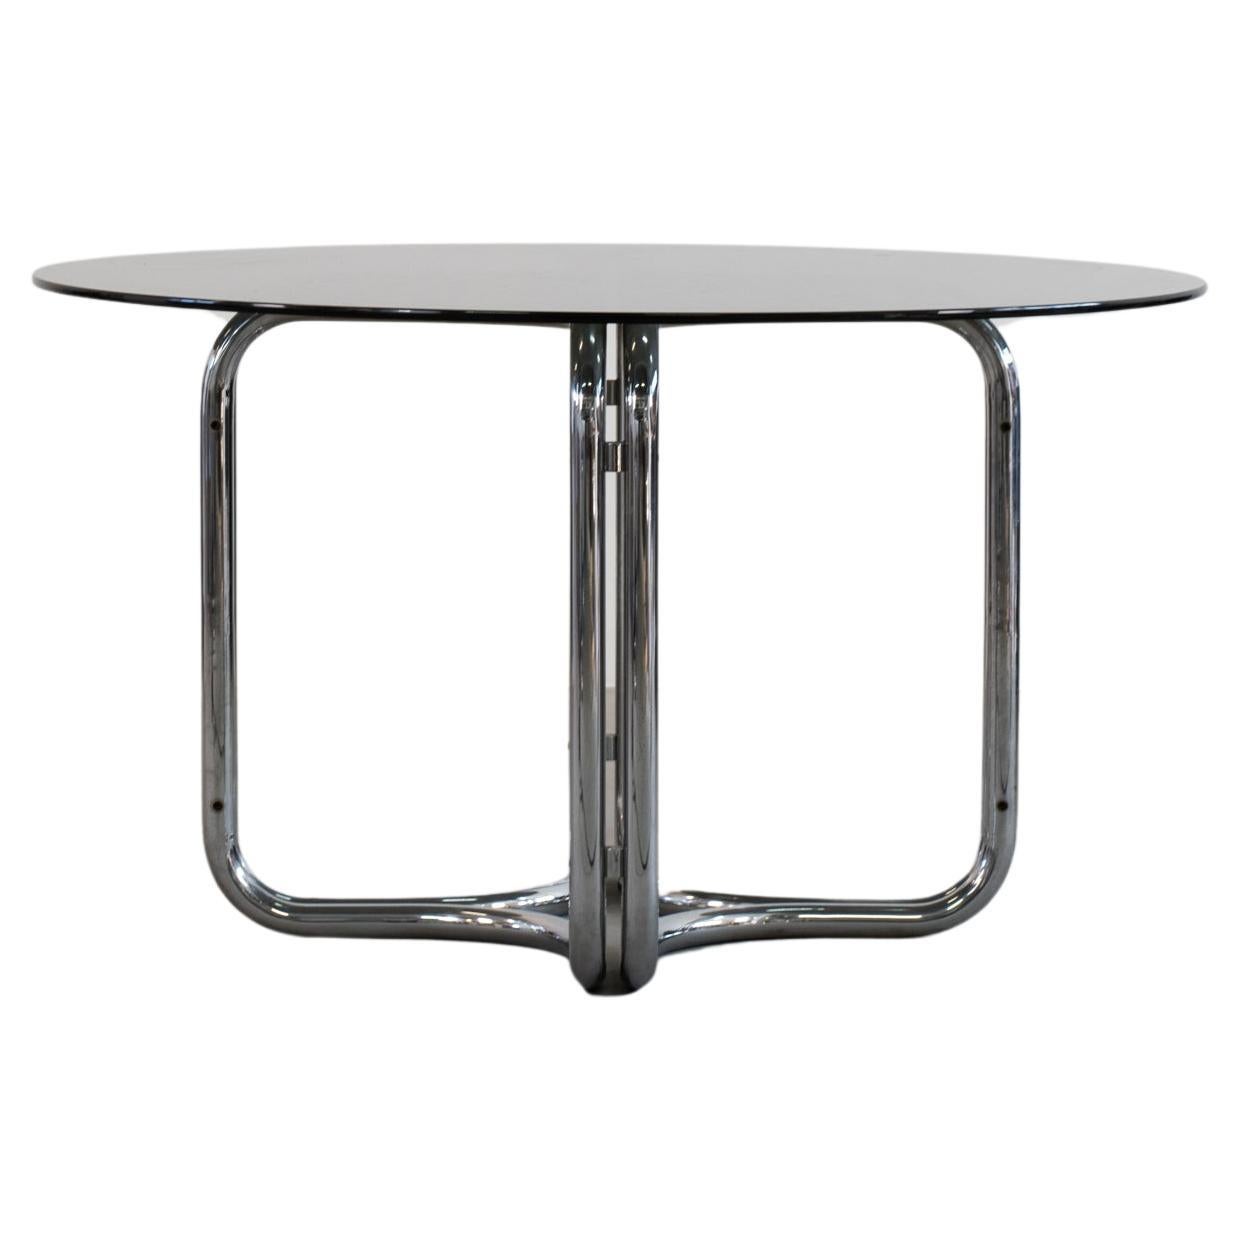 Giotto Stoppino Tables